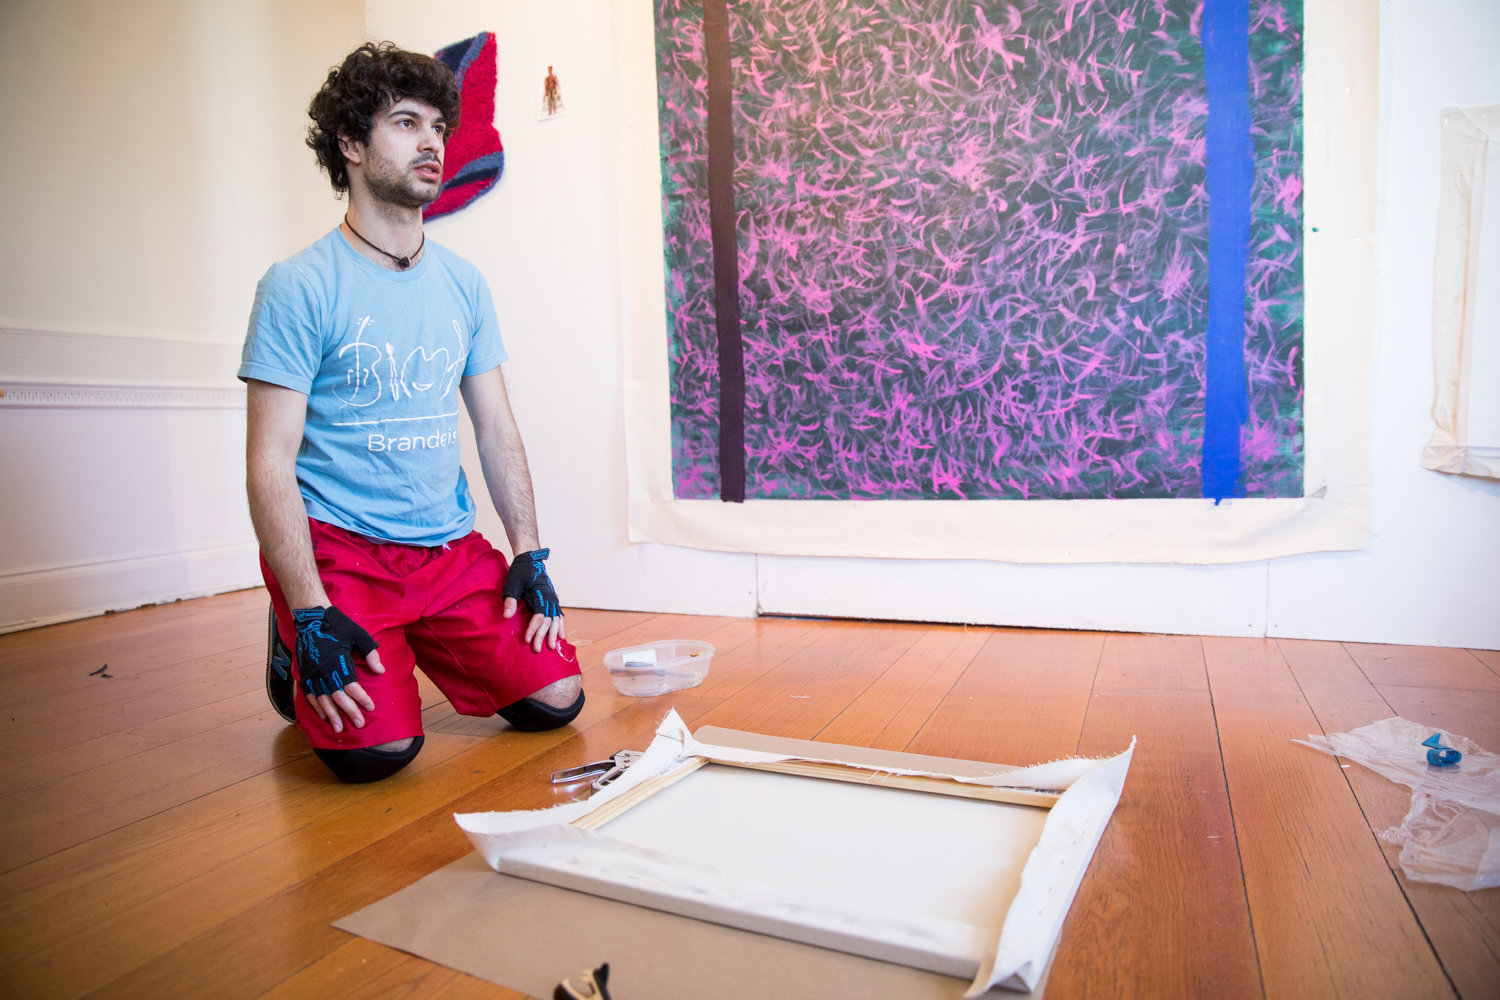 Ezra Benus talks about how medication serves as a jumping off point for the art he is creating as part of his Winter Workspace residency at Wave Hill.